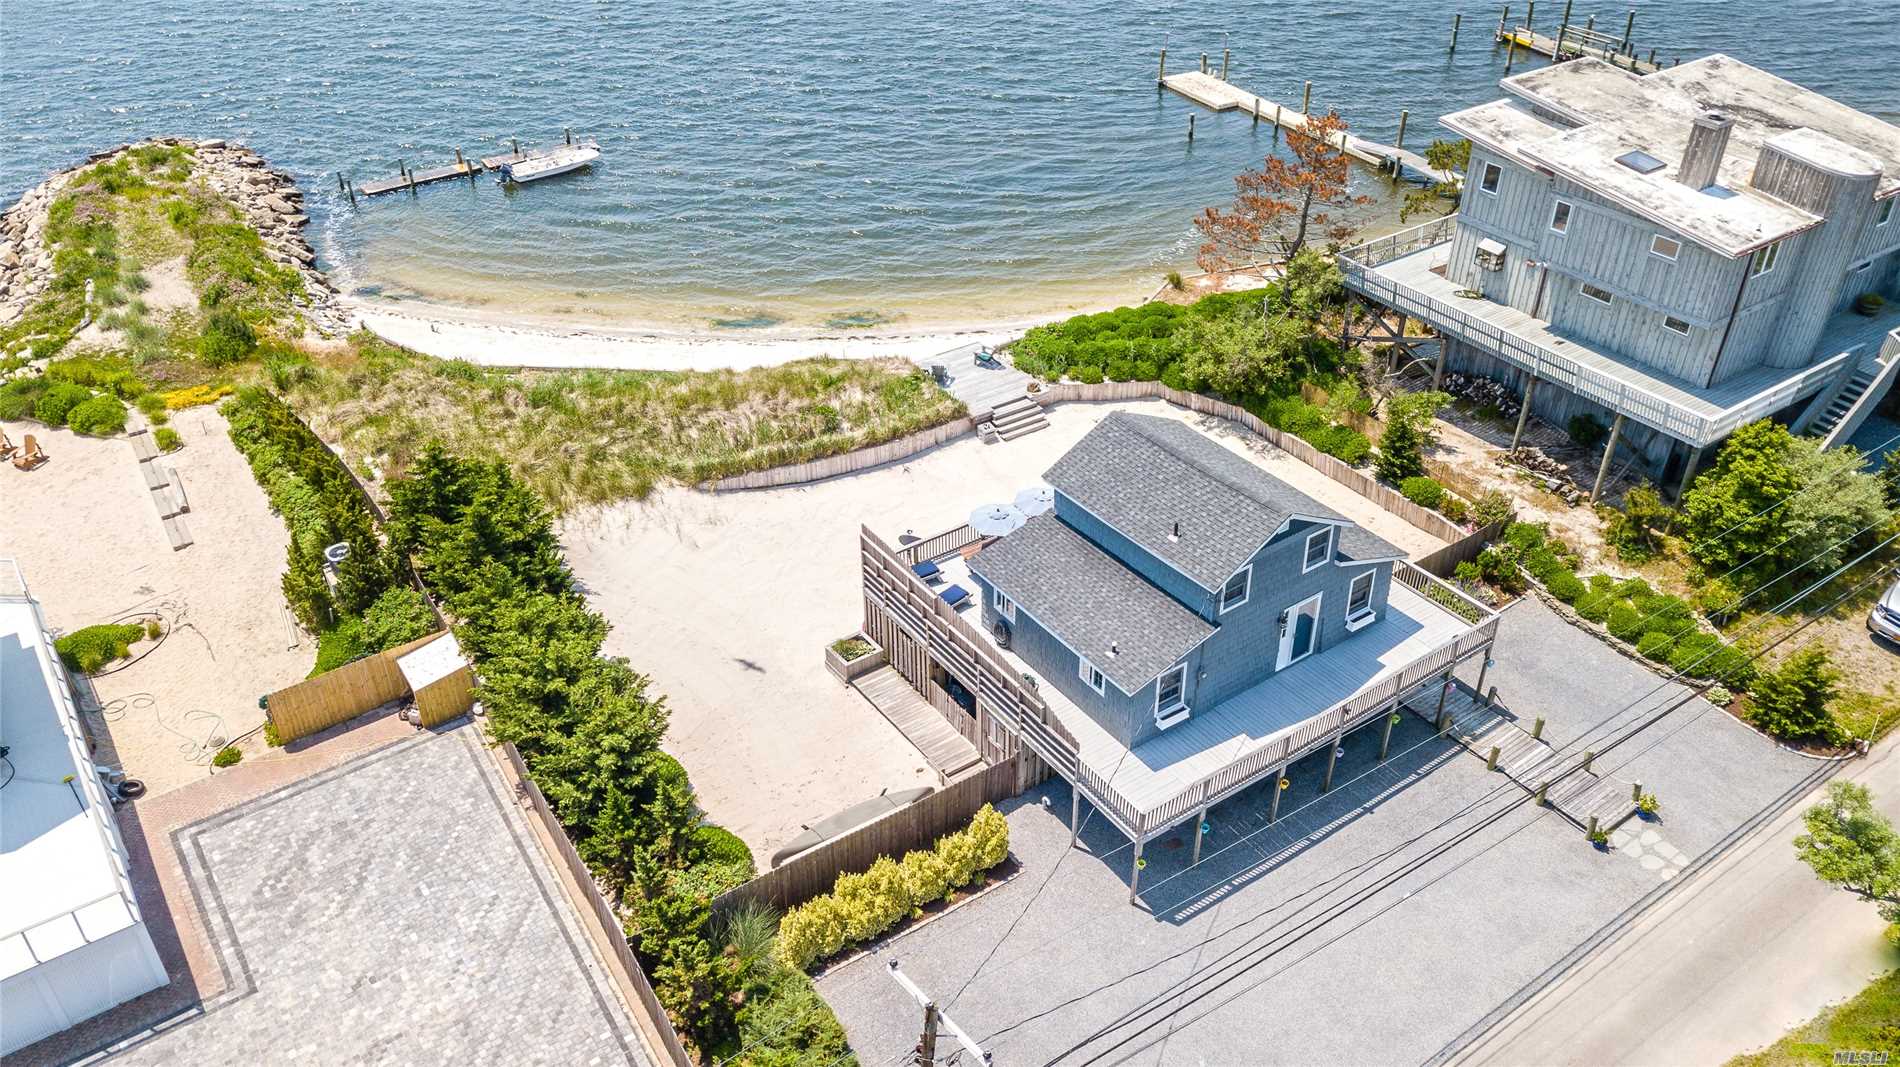 Spectacular Describes The Views & Location Of This Beach House. Overlook The Inlet & Robert Moses Bridge From Your Wrap Around Deck. Put Your Toes In The Sand Of Your Own Beach. Dock Your Boat At Your Own Floating Dock Property Has A Retaining Wall Around Perimeter And A Jetty Off The Beach. This Is A Gated Community On The East End Of Oak Beach It Features Large Property And Reasonable Taxes. Year Round Living In Paradise !!